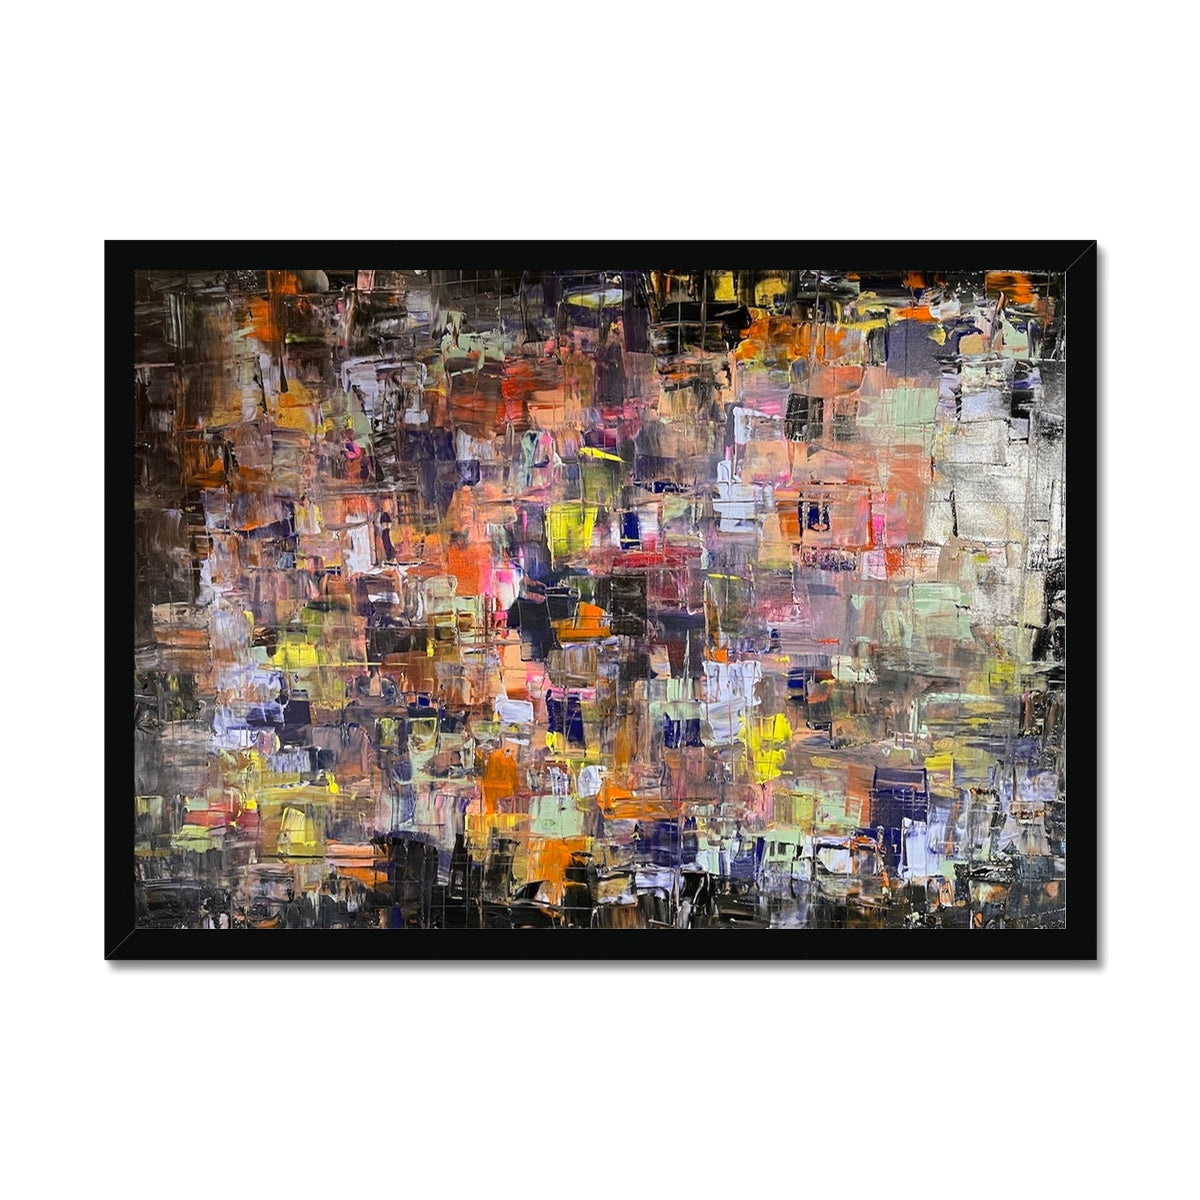 Never Enough Abstract Painting | Framed Prints From Scotland-Framed Prints-Abstract & Impressionistic Art Gallery-A2 Landscape-Black Frame-Paintings, Prints, Homeware, Art Gifts From Scotland By Scottish Artist Kevin Hunter